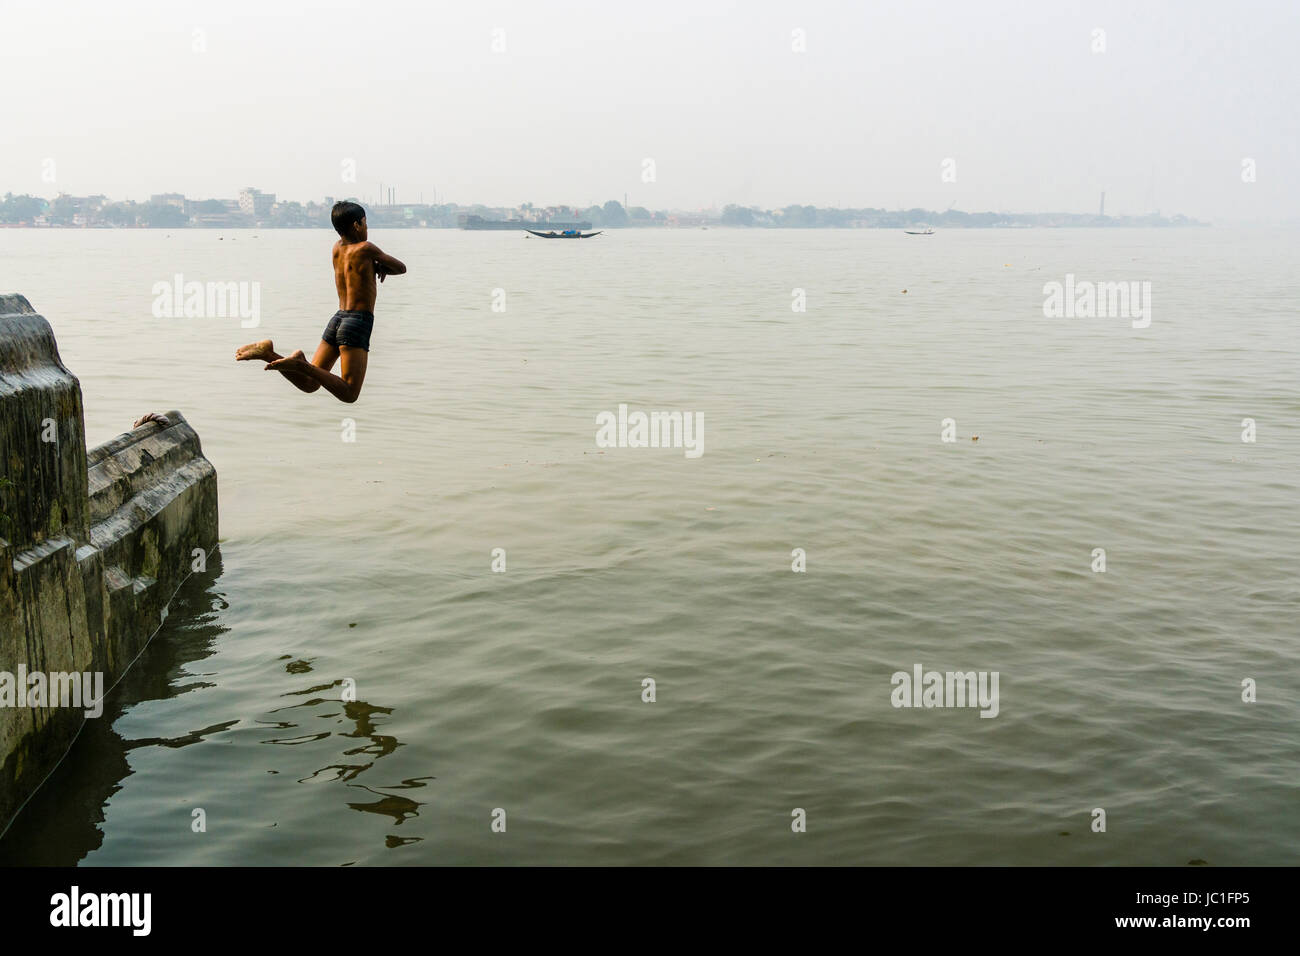 A boy is jumping into the Hoogli River from a wall Stock Photo